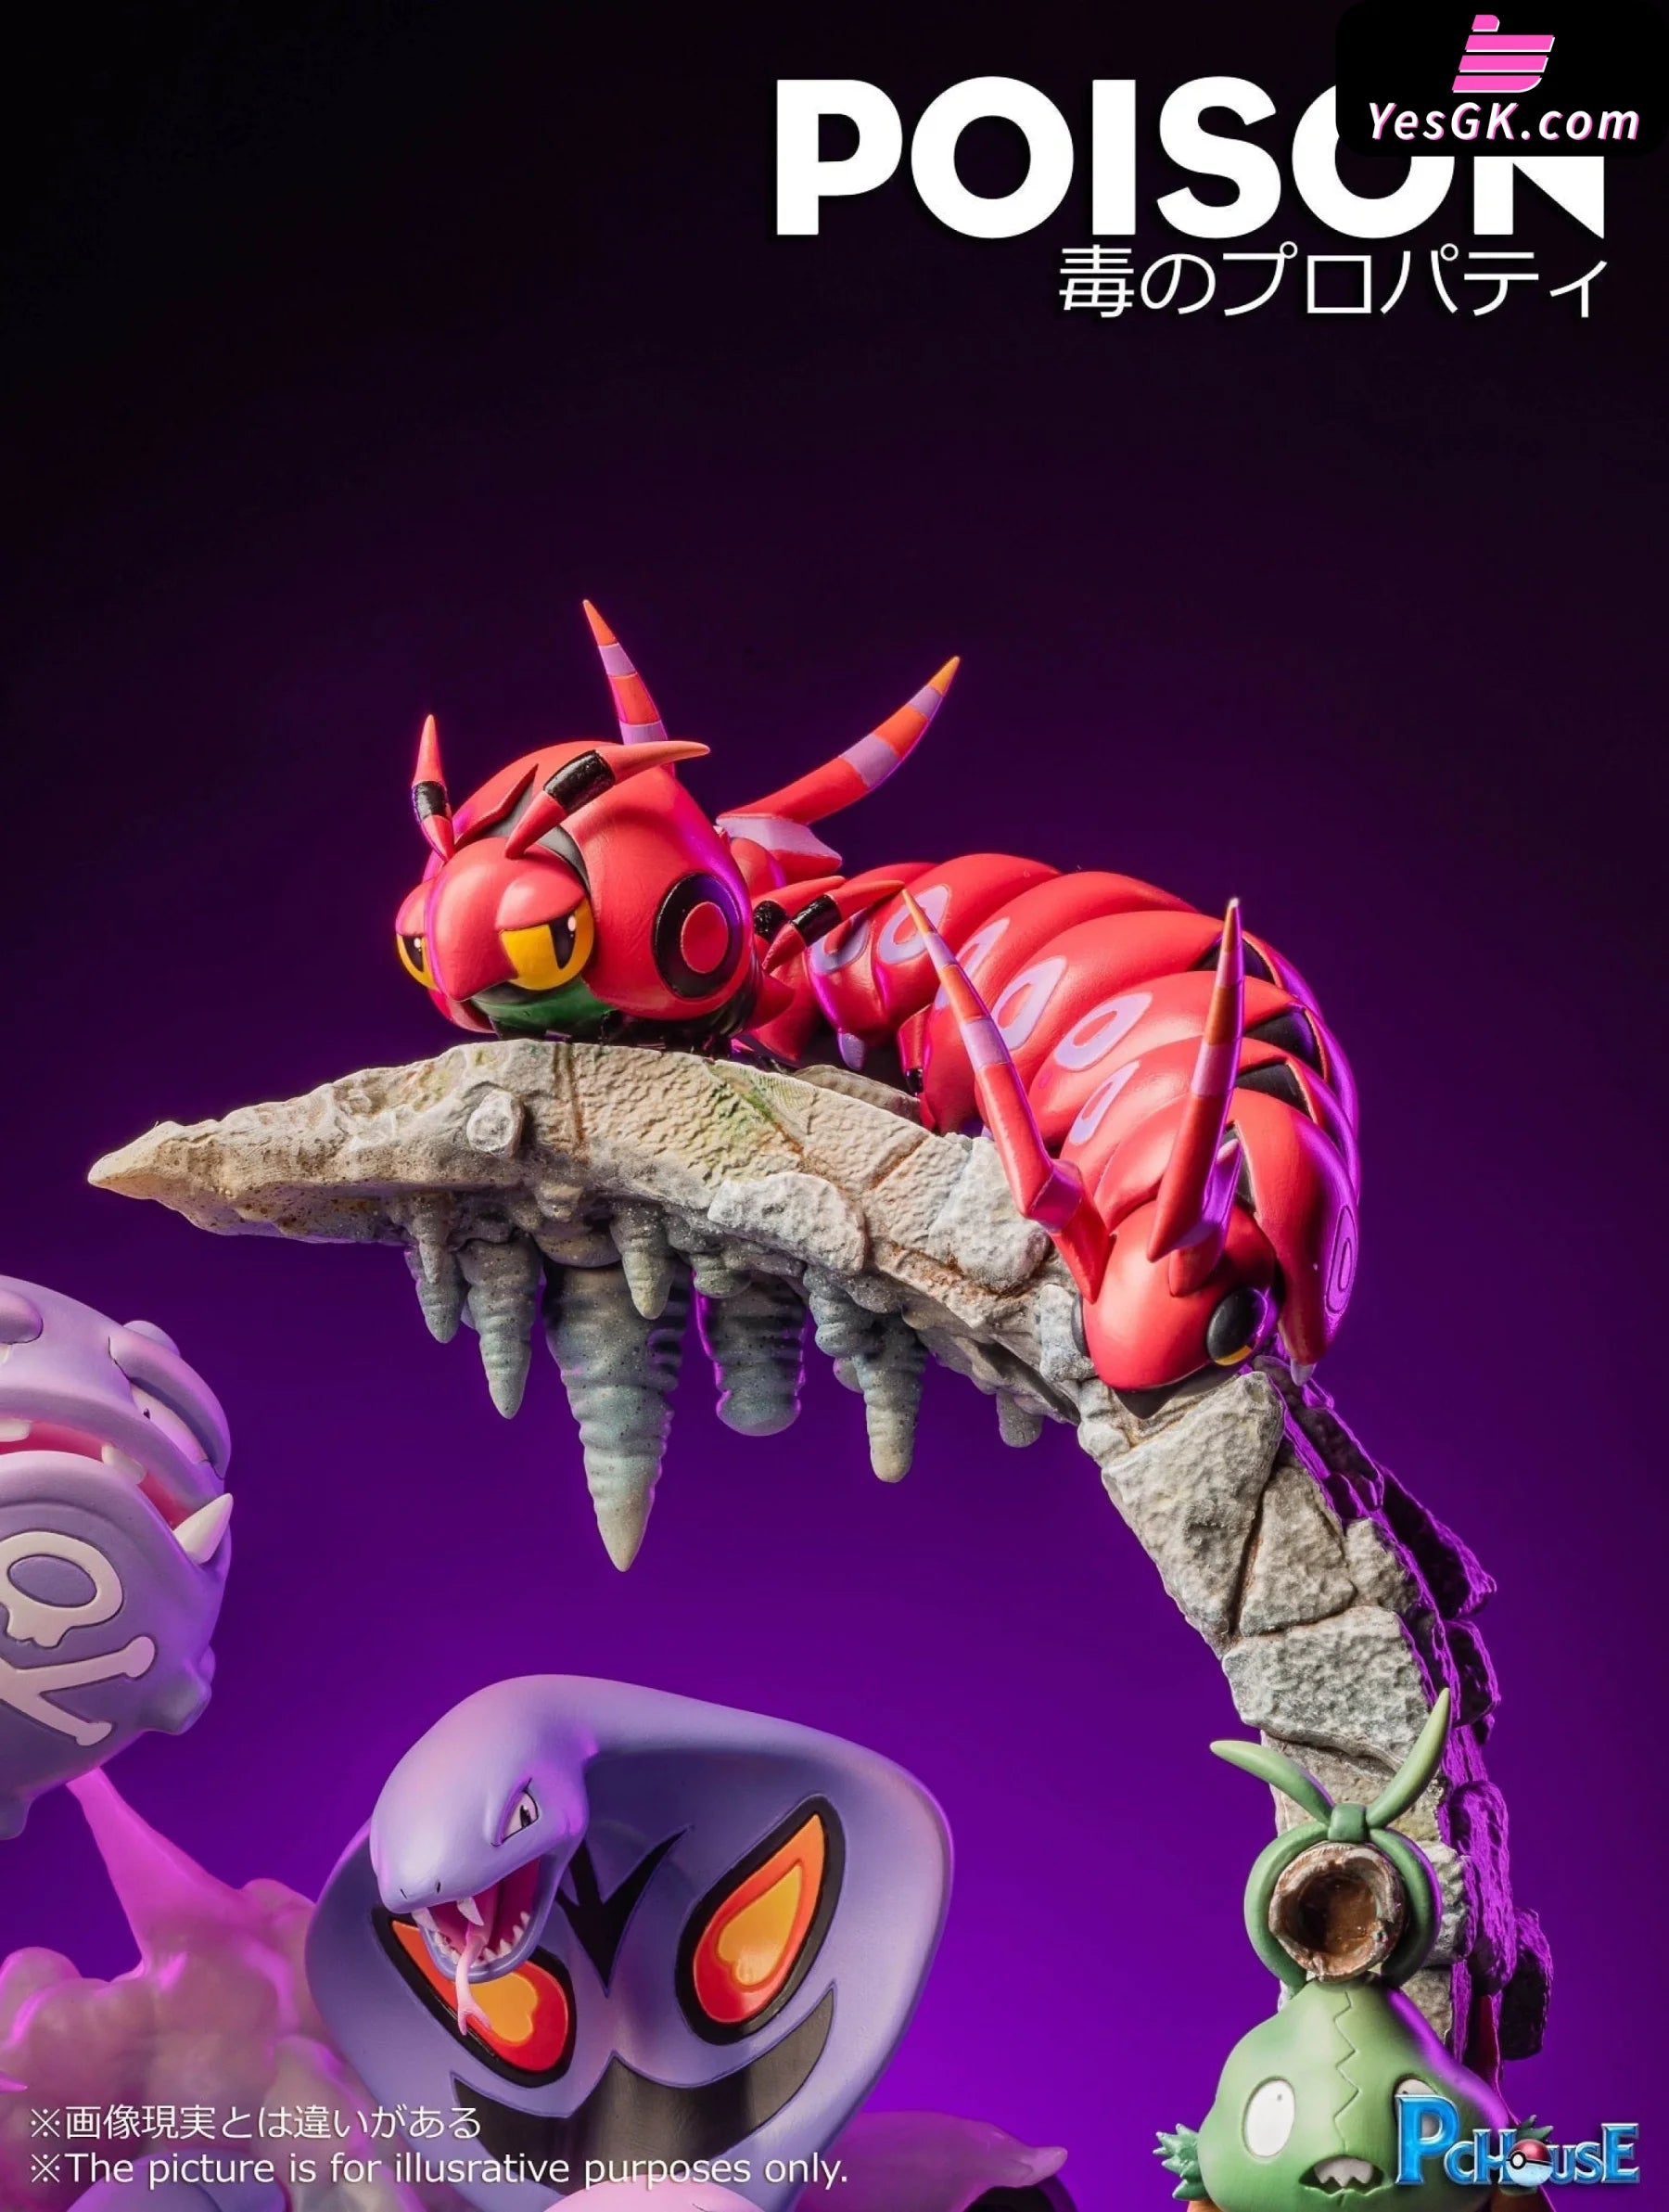 BUG TYPE Resin PC House Studio Model Collectibles Statue 35cm